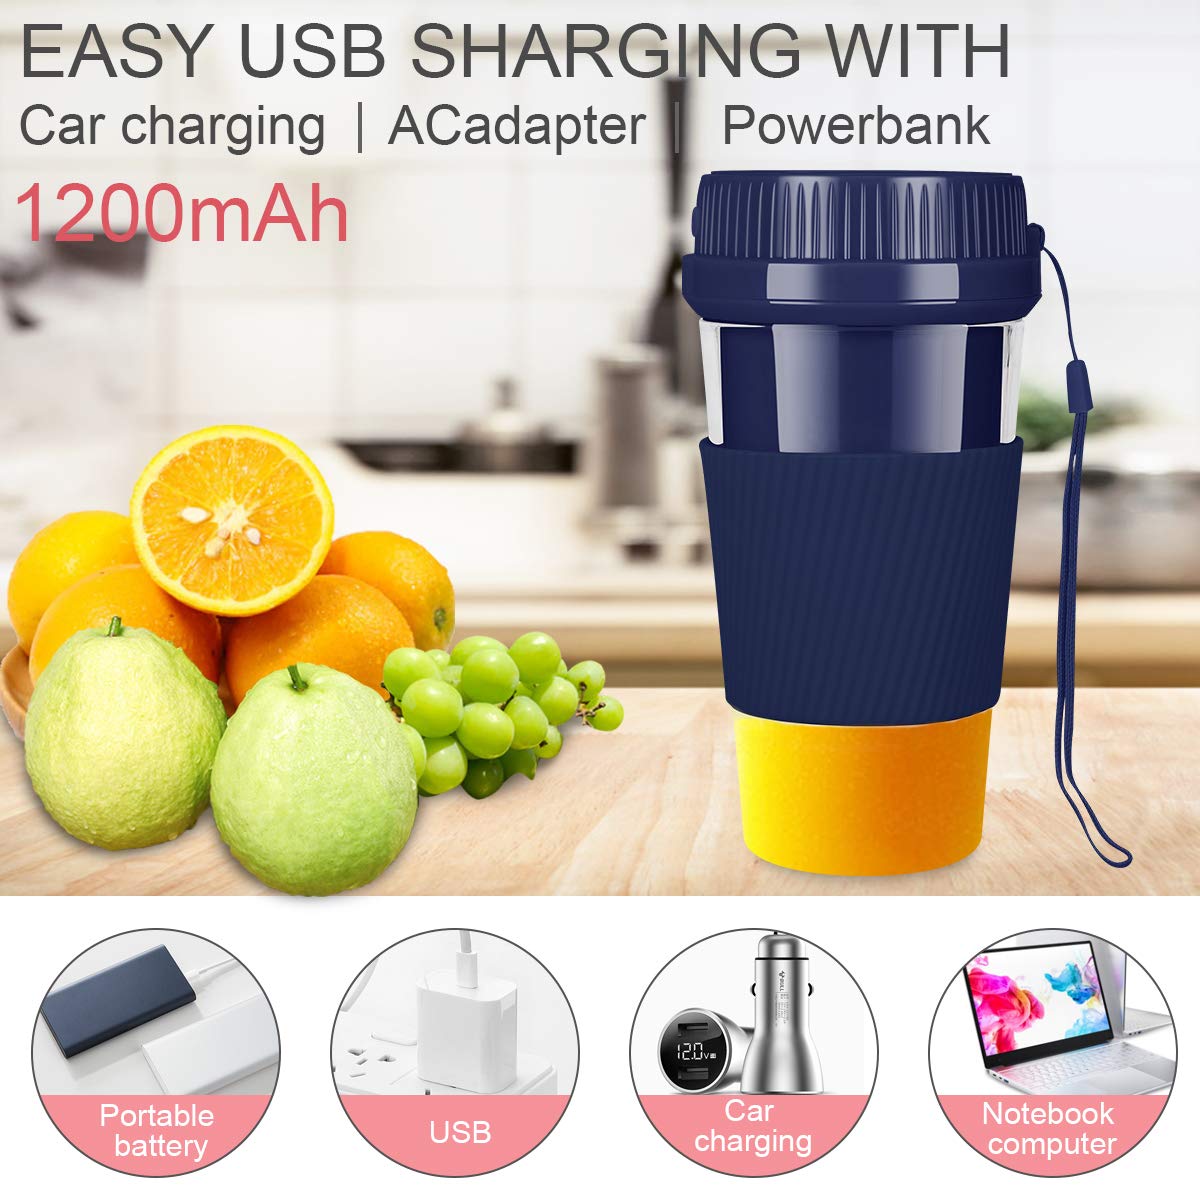 iBazal Portable Blender, Cordless Mini Personal Blender USB Rechargeable Smoothie Juicer Cup, 250mL Waterproof Fruit Mixing Machine Baby Travel Home Office Sports Outdoors, BPA Free -Dark blue